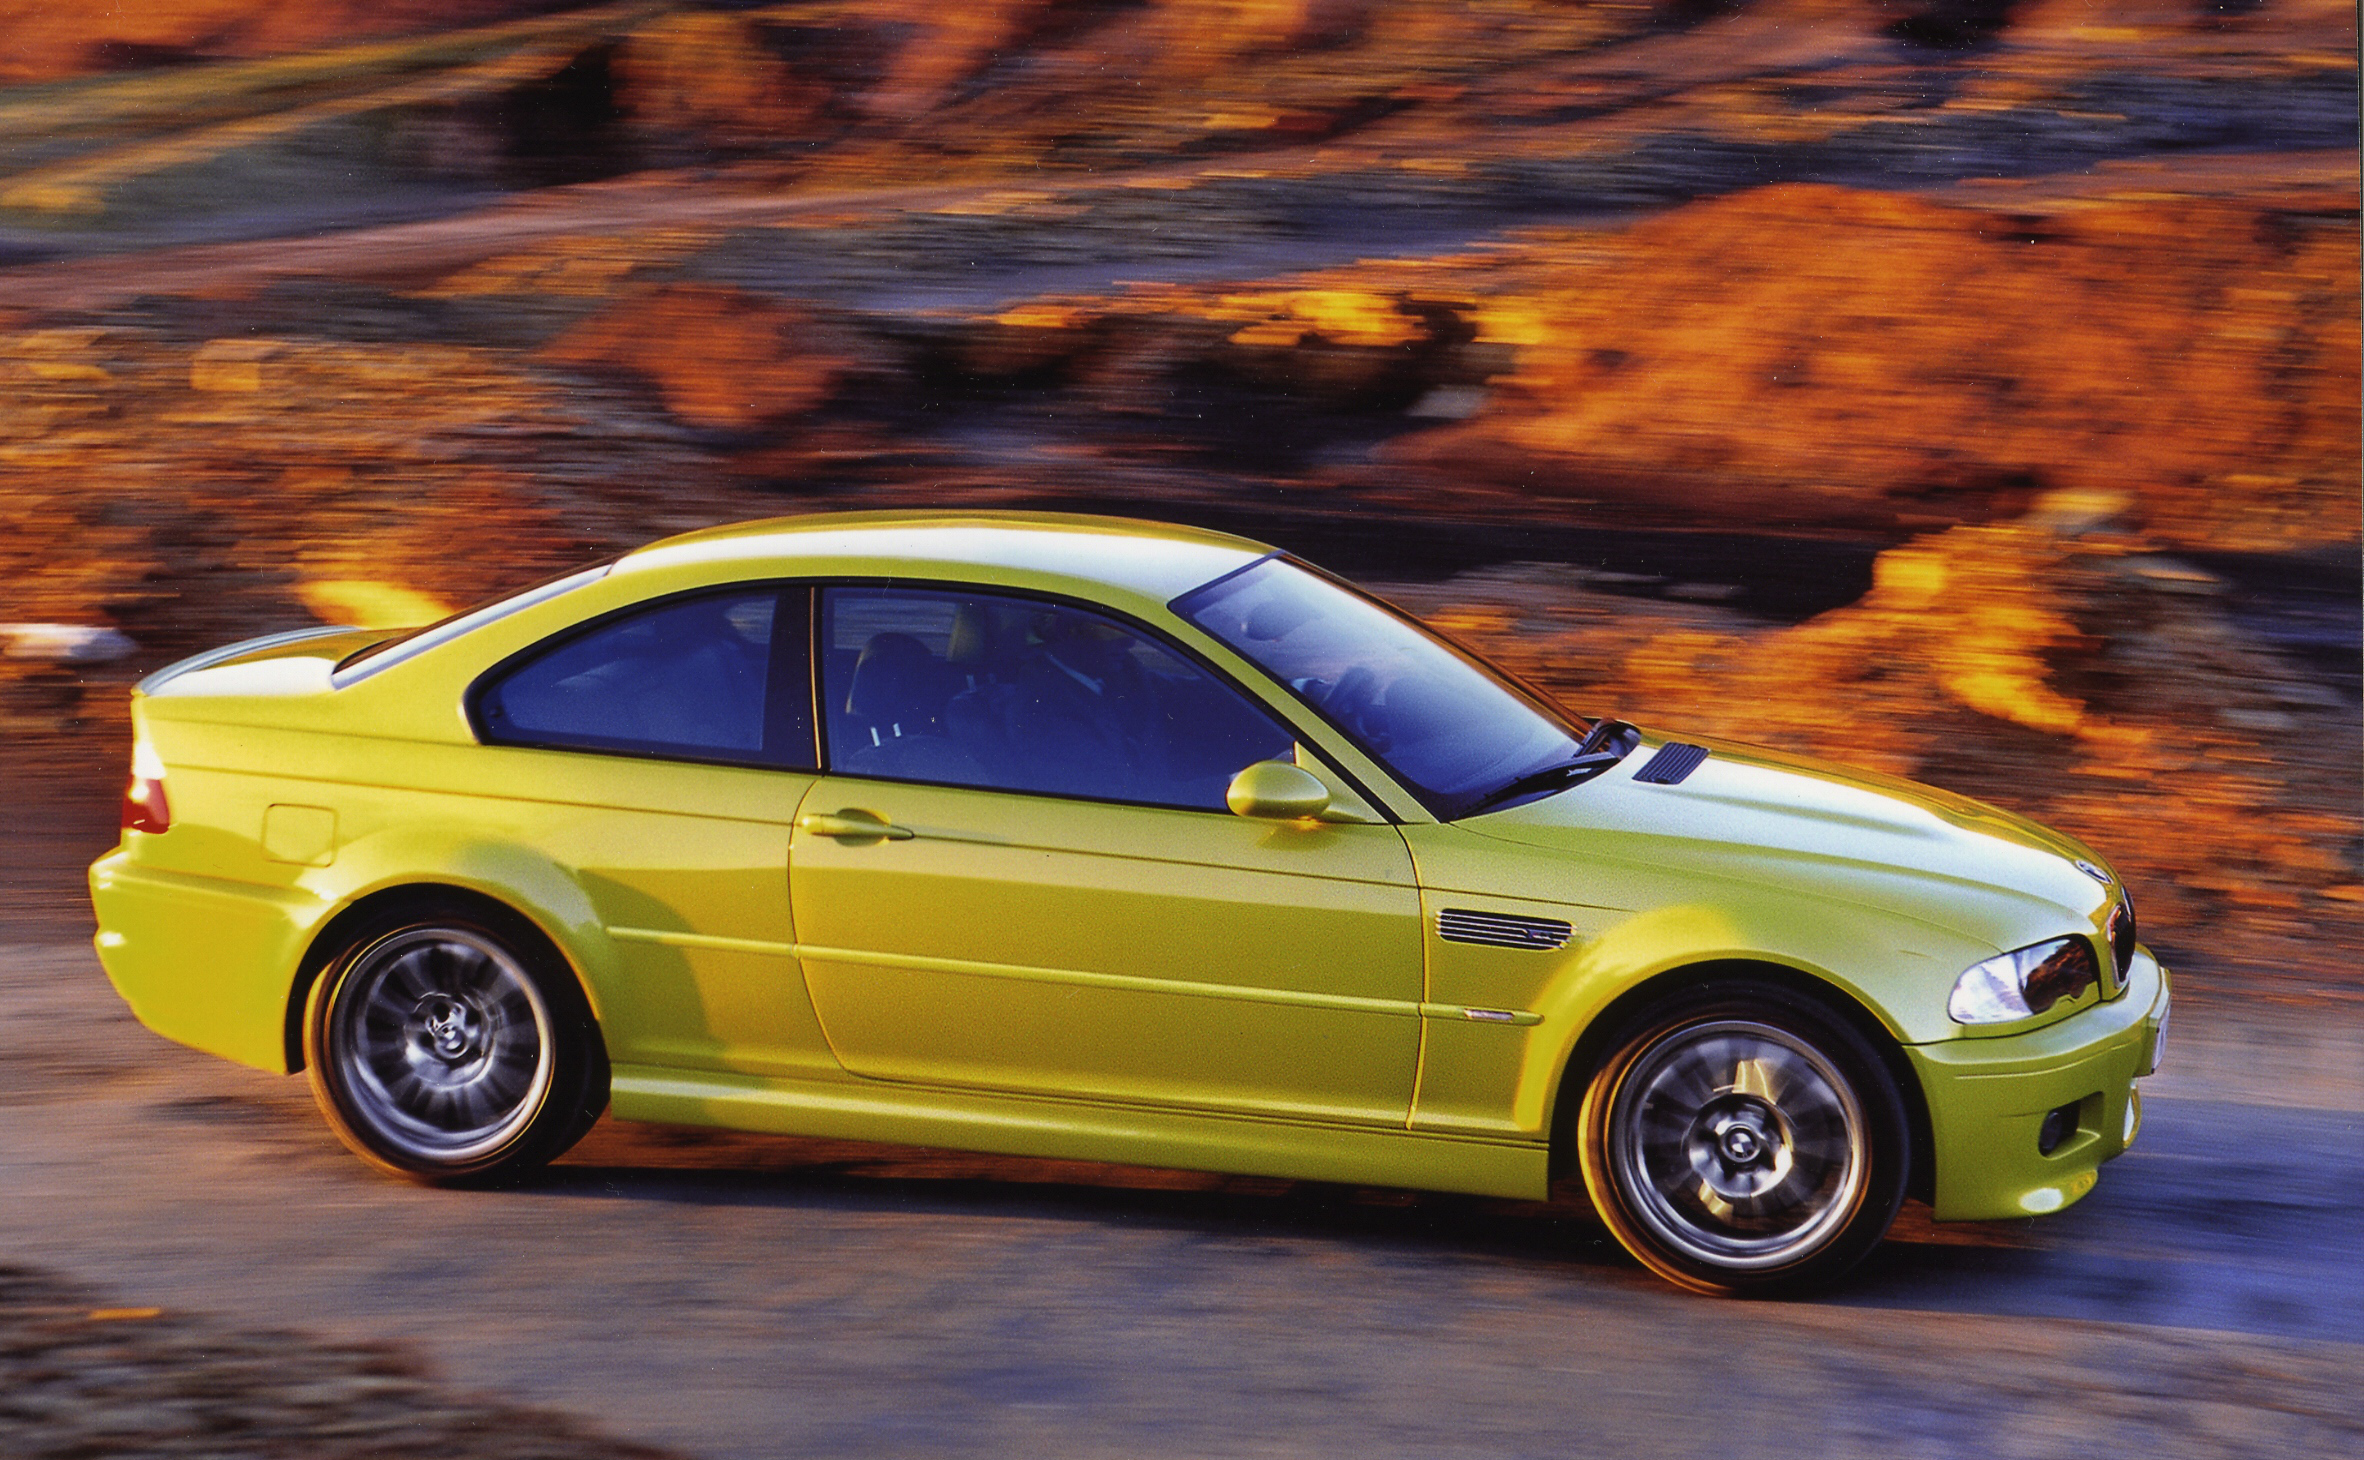 6 Reasons to own an E46 M3